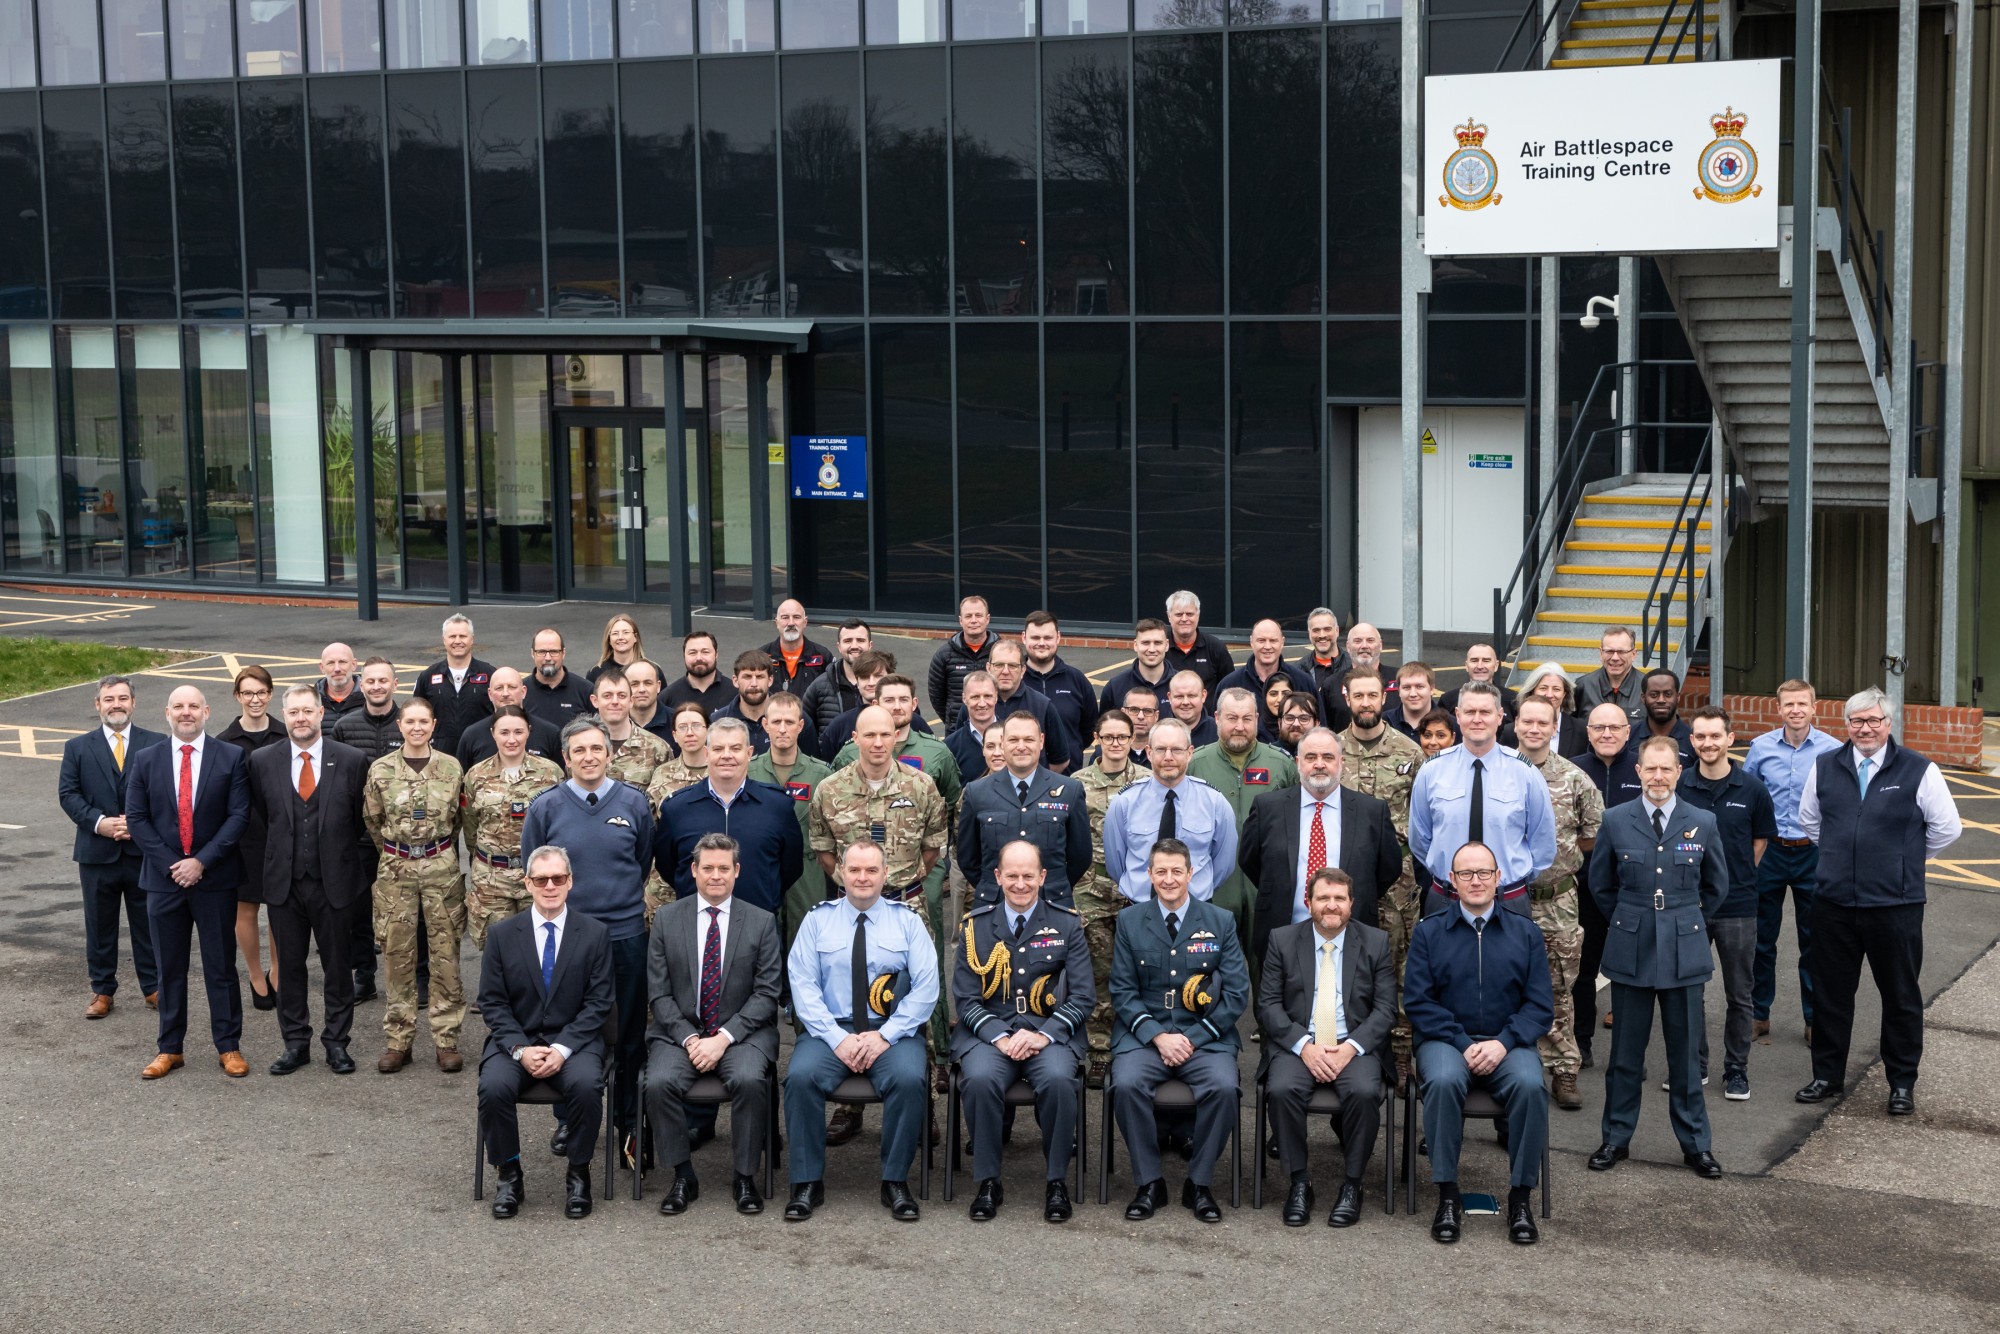 The Chief of the Air Staff (CAS), Air Chief Marshal Sir Mike Wigston visited the Air Battlespace Training Centre, RAF Waddington, on February 13 February.